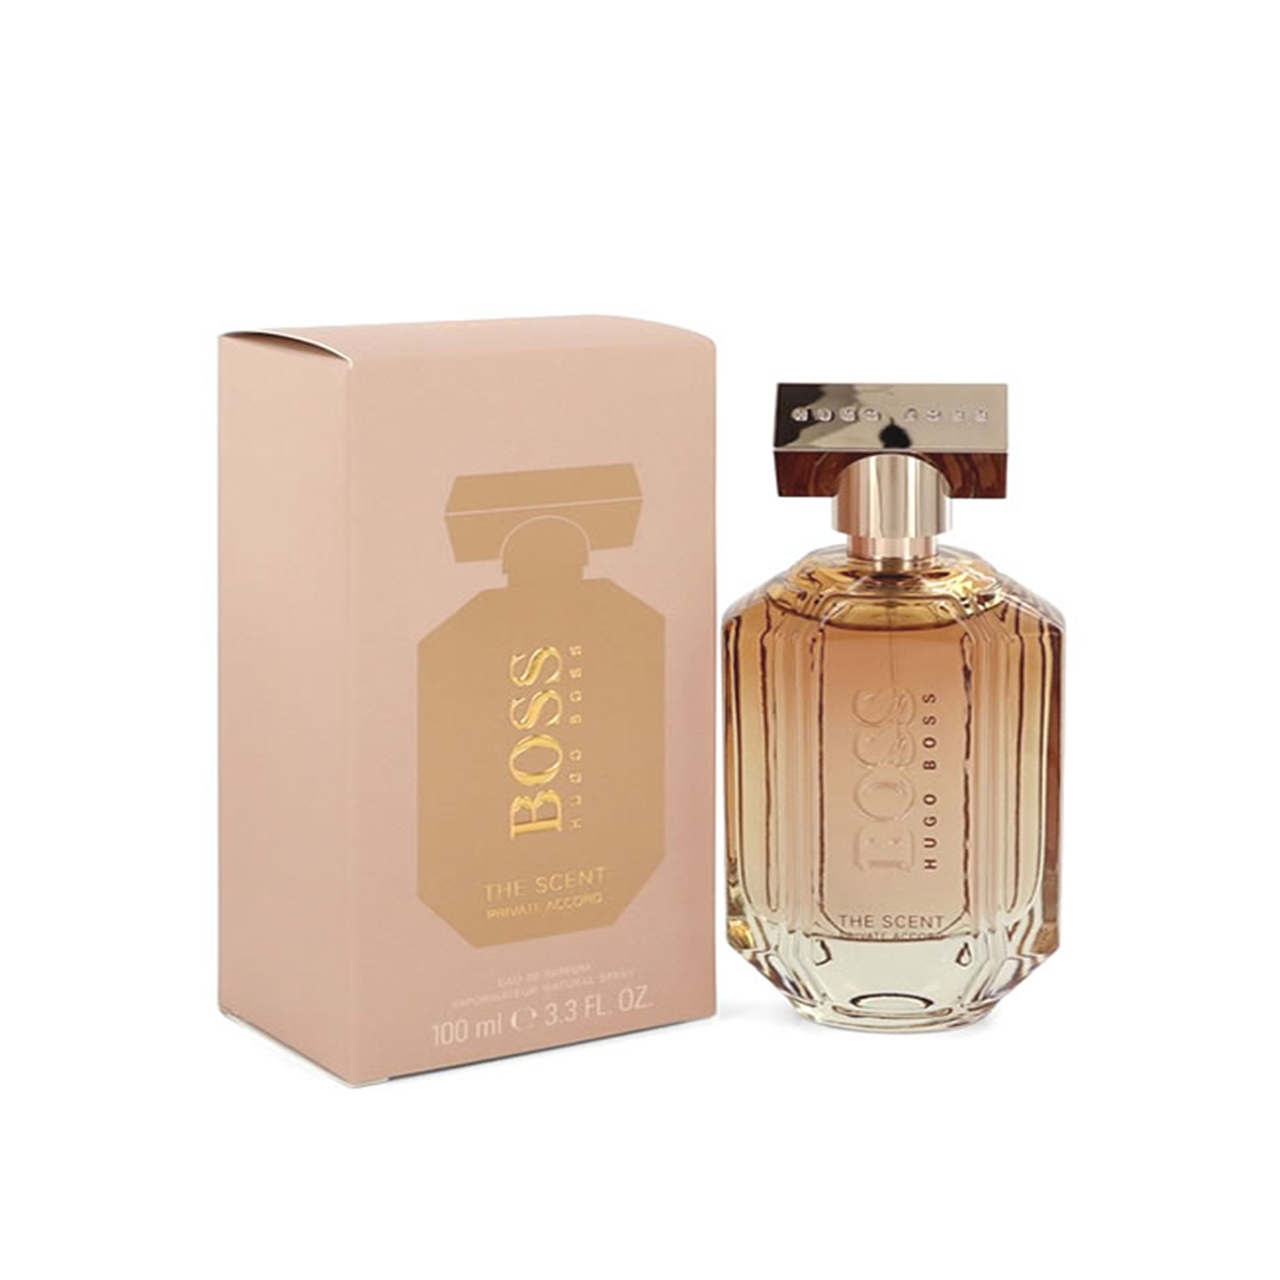 Hugo Boss the Scent for her EDP, 100 ml. The Scent for her Eau de Parfum. Hugo Boss the Scent absolute for her. Пирамида Boss the Scent for her.